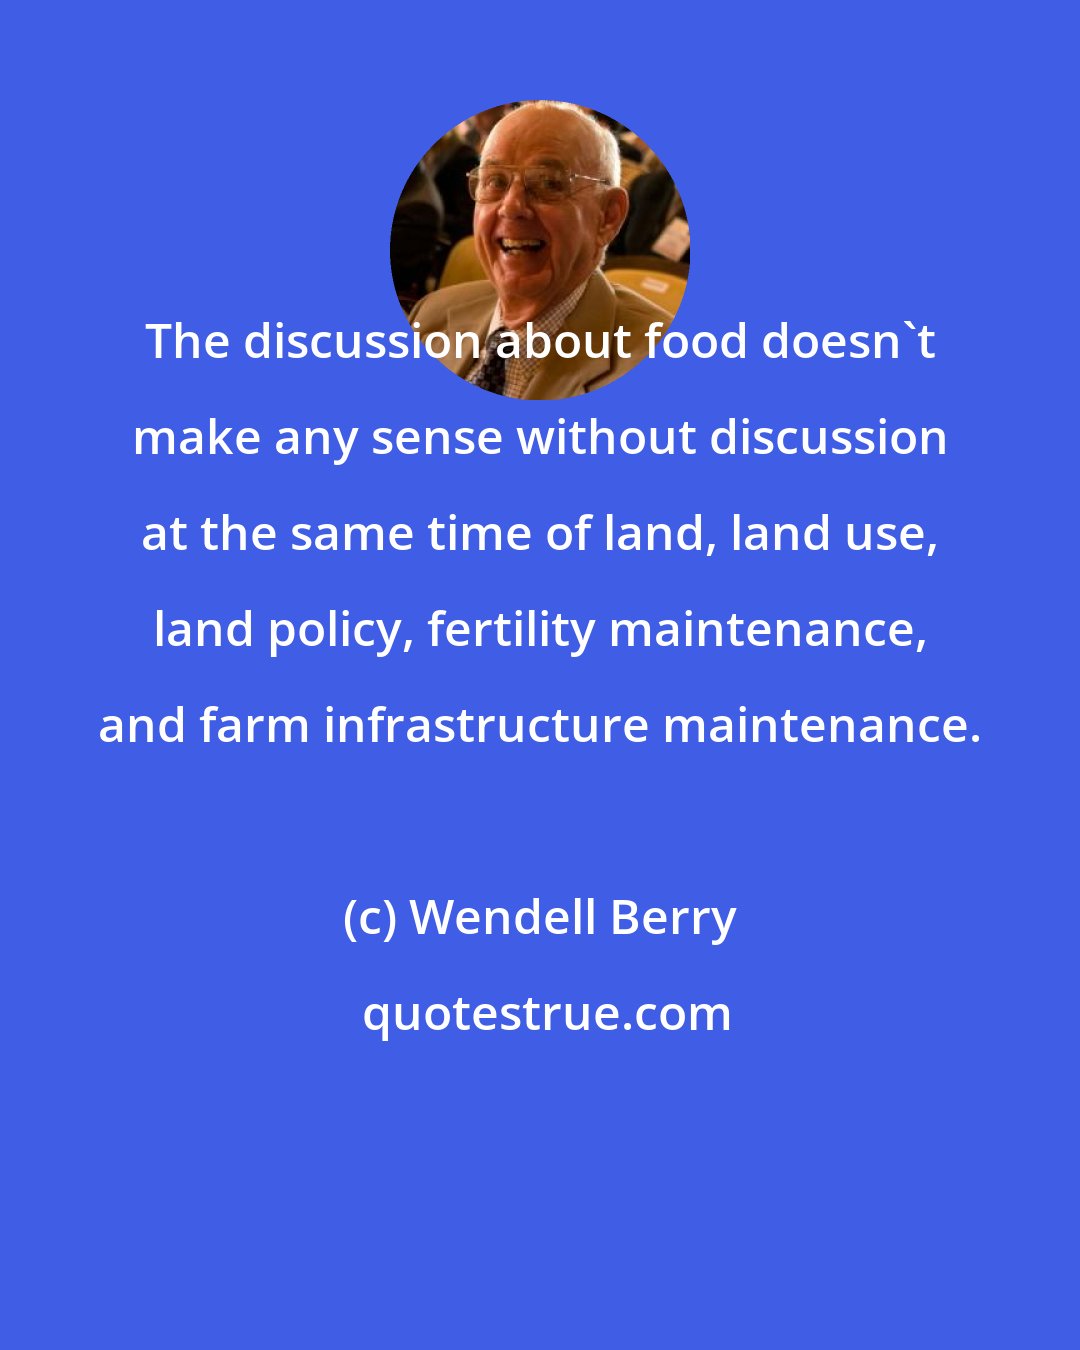 Wendell Berry: The discussion about food doesn't make any sense without discussion at the same time of land, land use, land policy, fertility maintenance, and farm infrastructure maintenance.